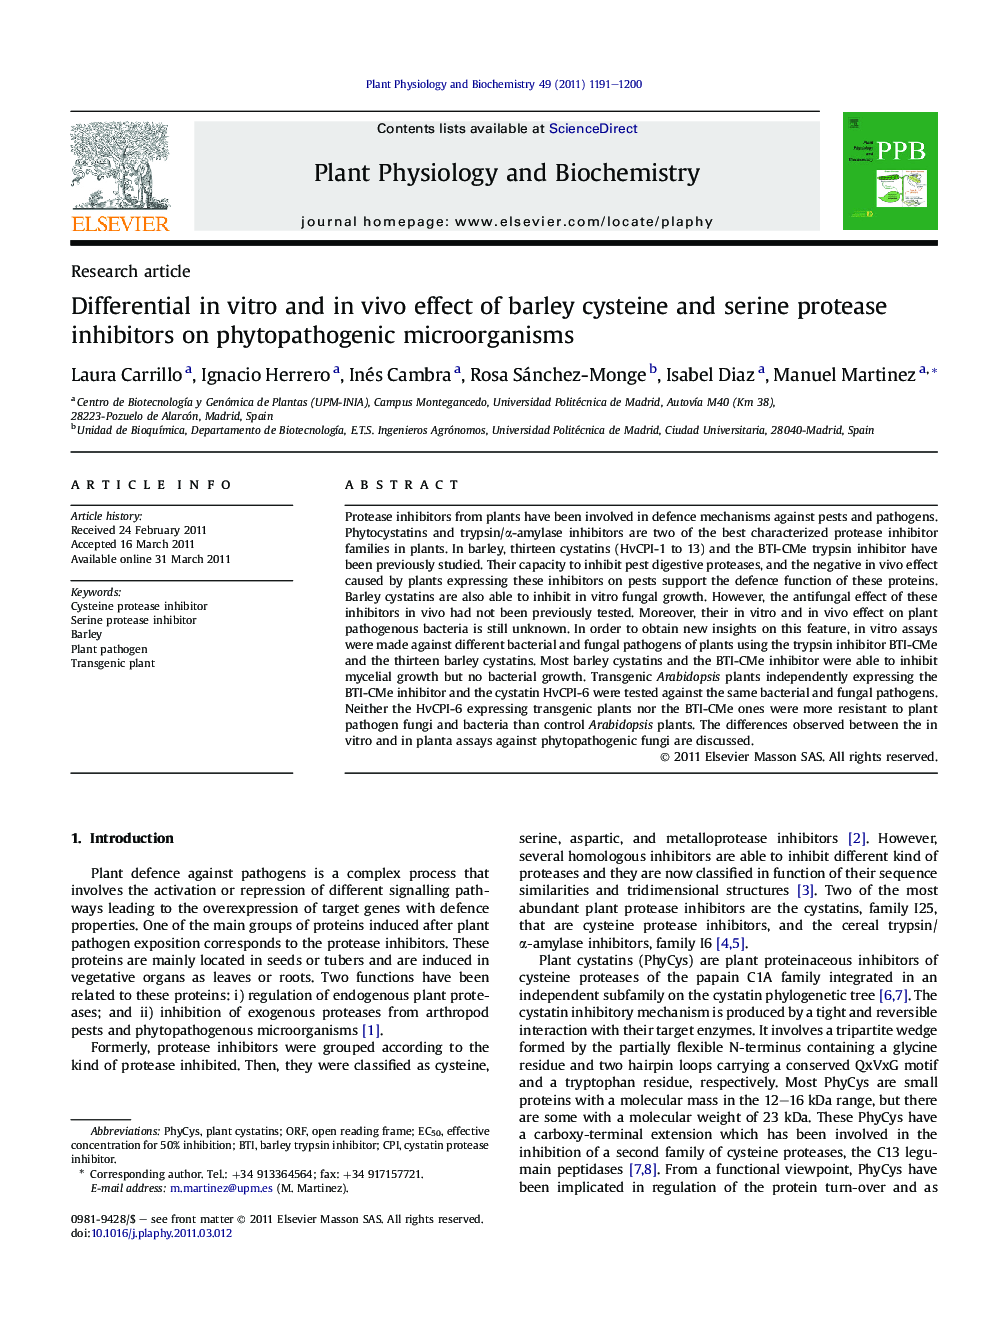 Differential in vitro and in vivo effect of barley cysteine and serine protease inhibitors on phytopathogenic microorganisms